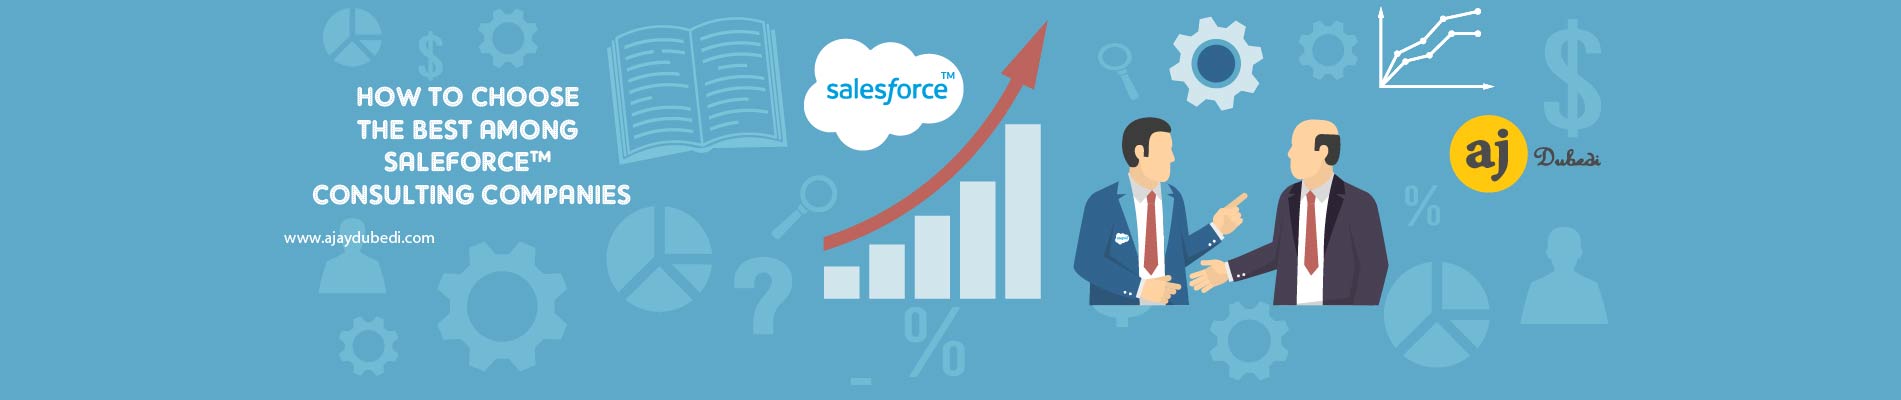 How To Choose The Best Among Salesforce Consulting Companies